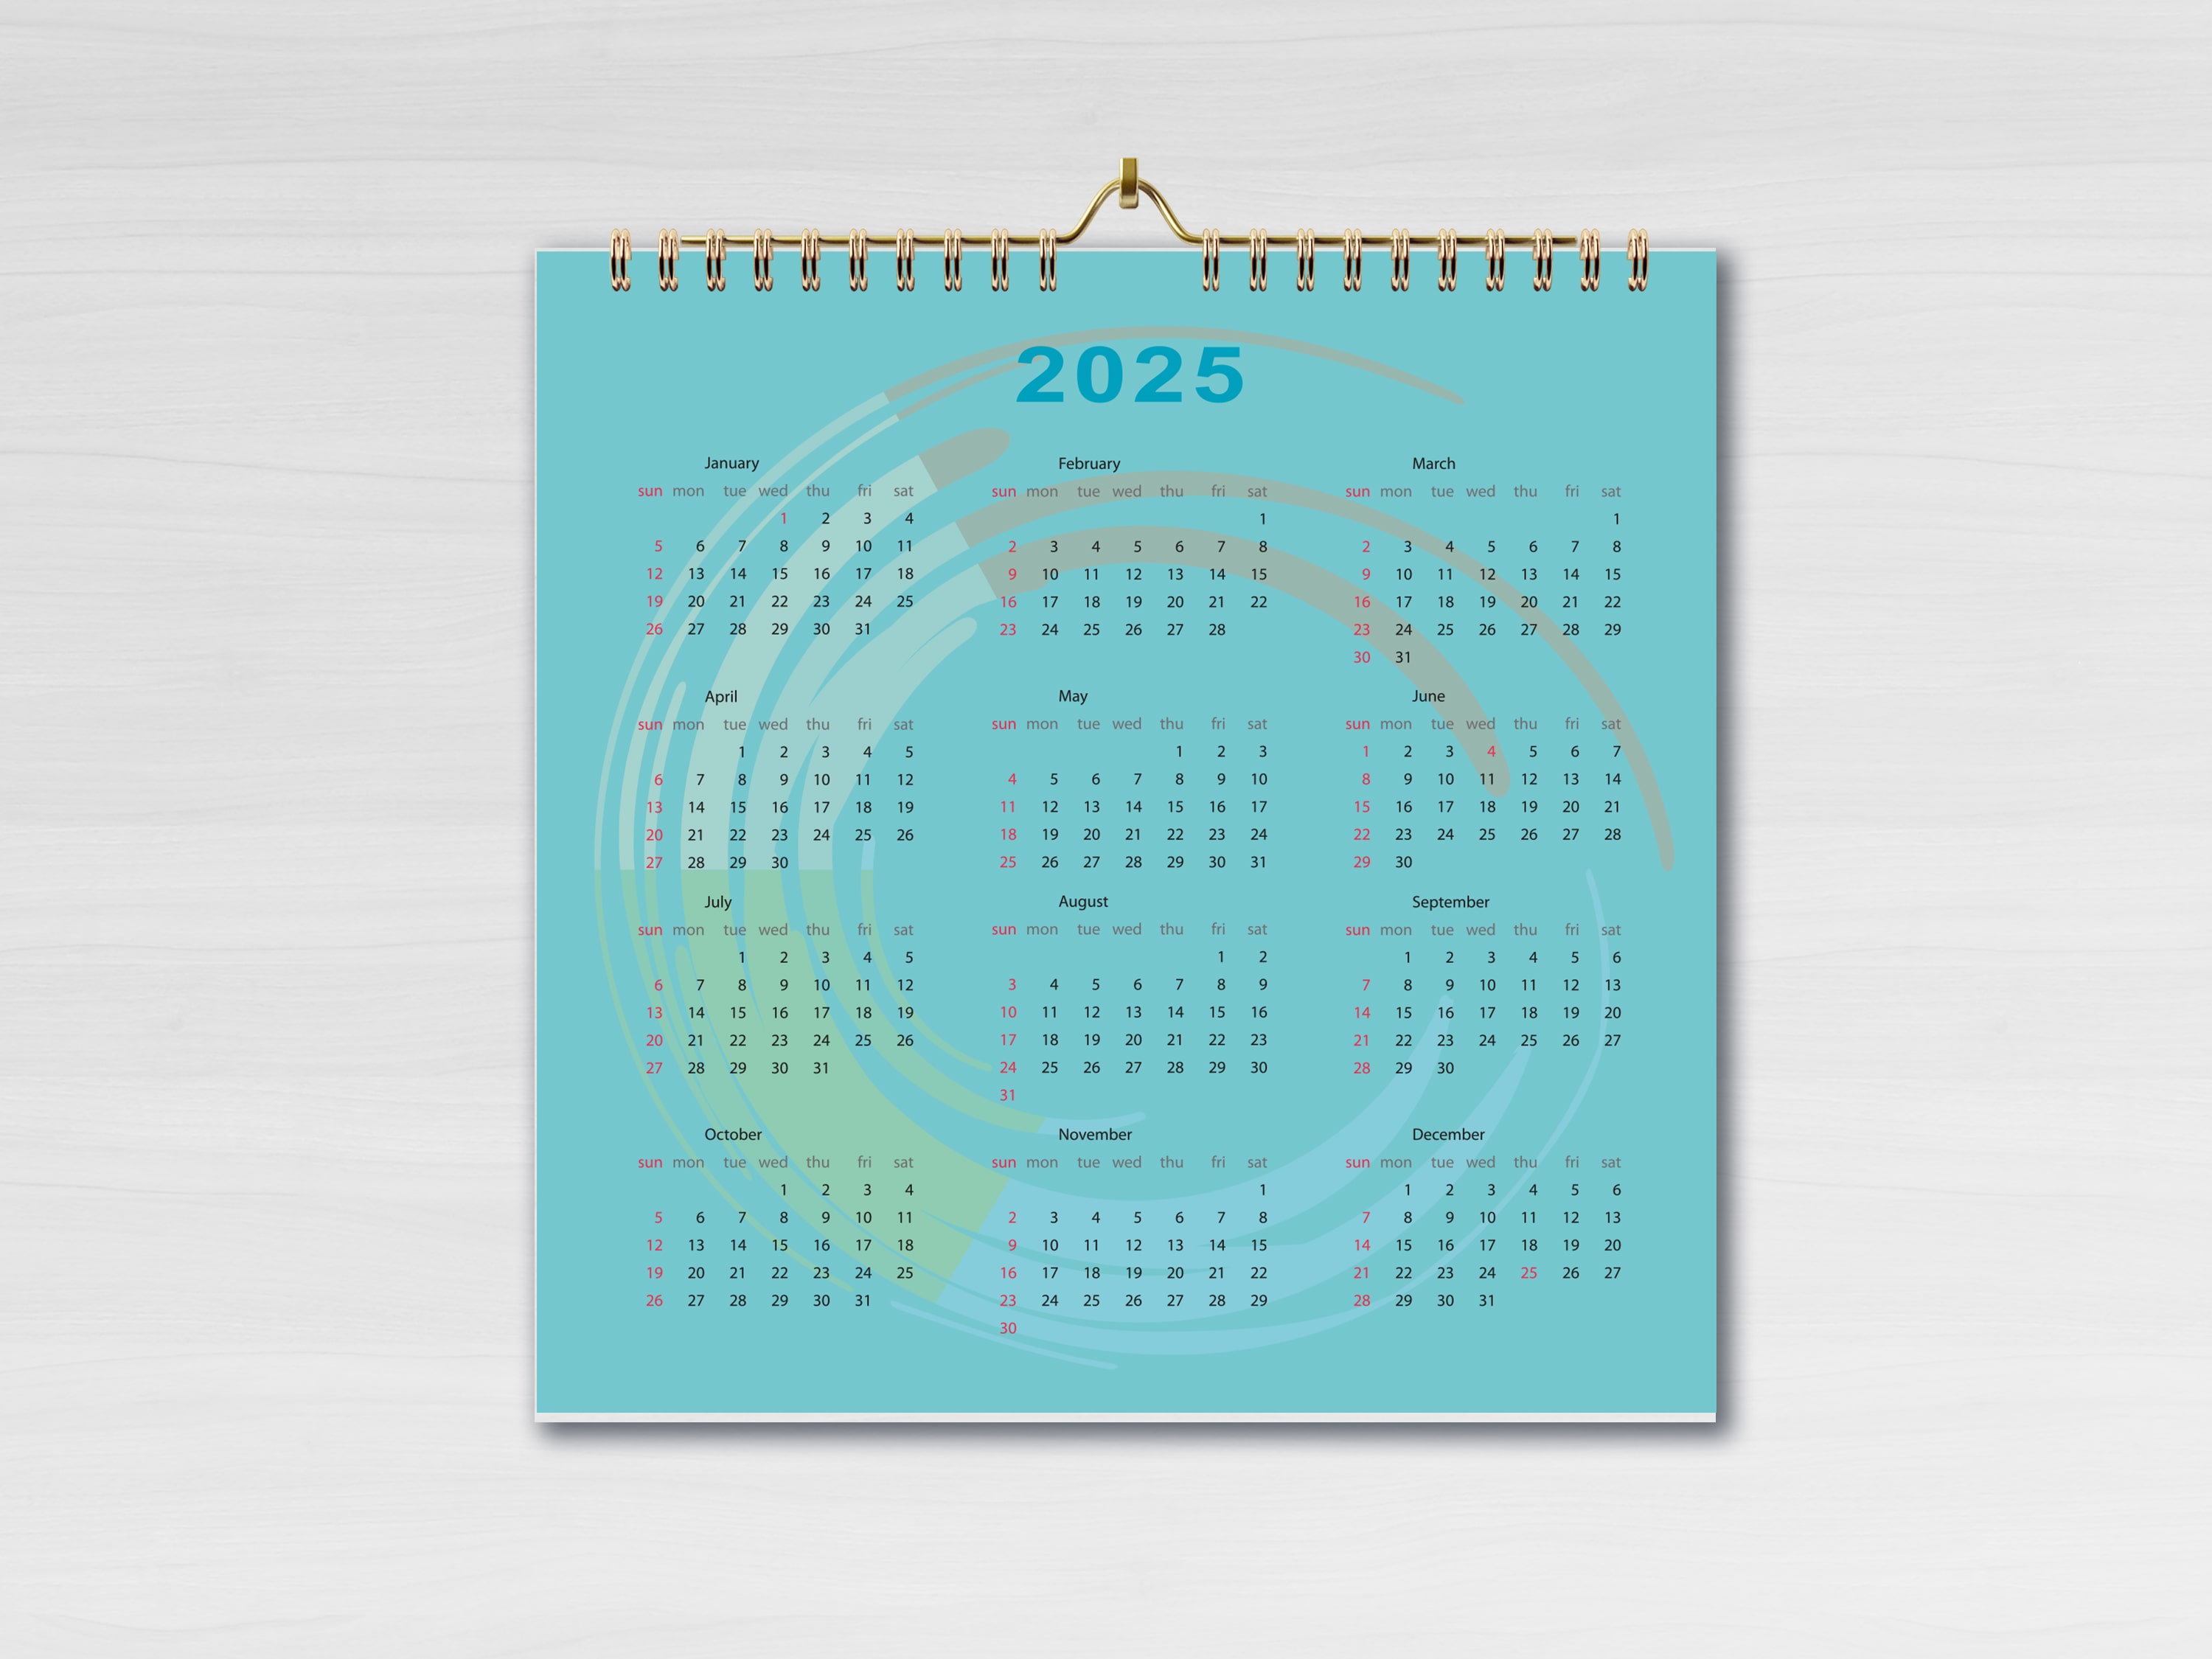 calendar 2024 numbers around the circle floral elements editable square pages 297x297 mm 5 min 877